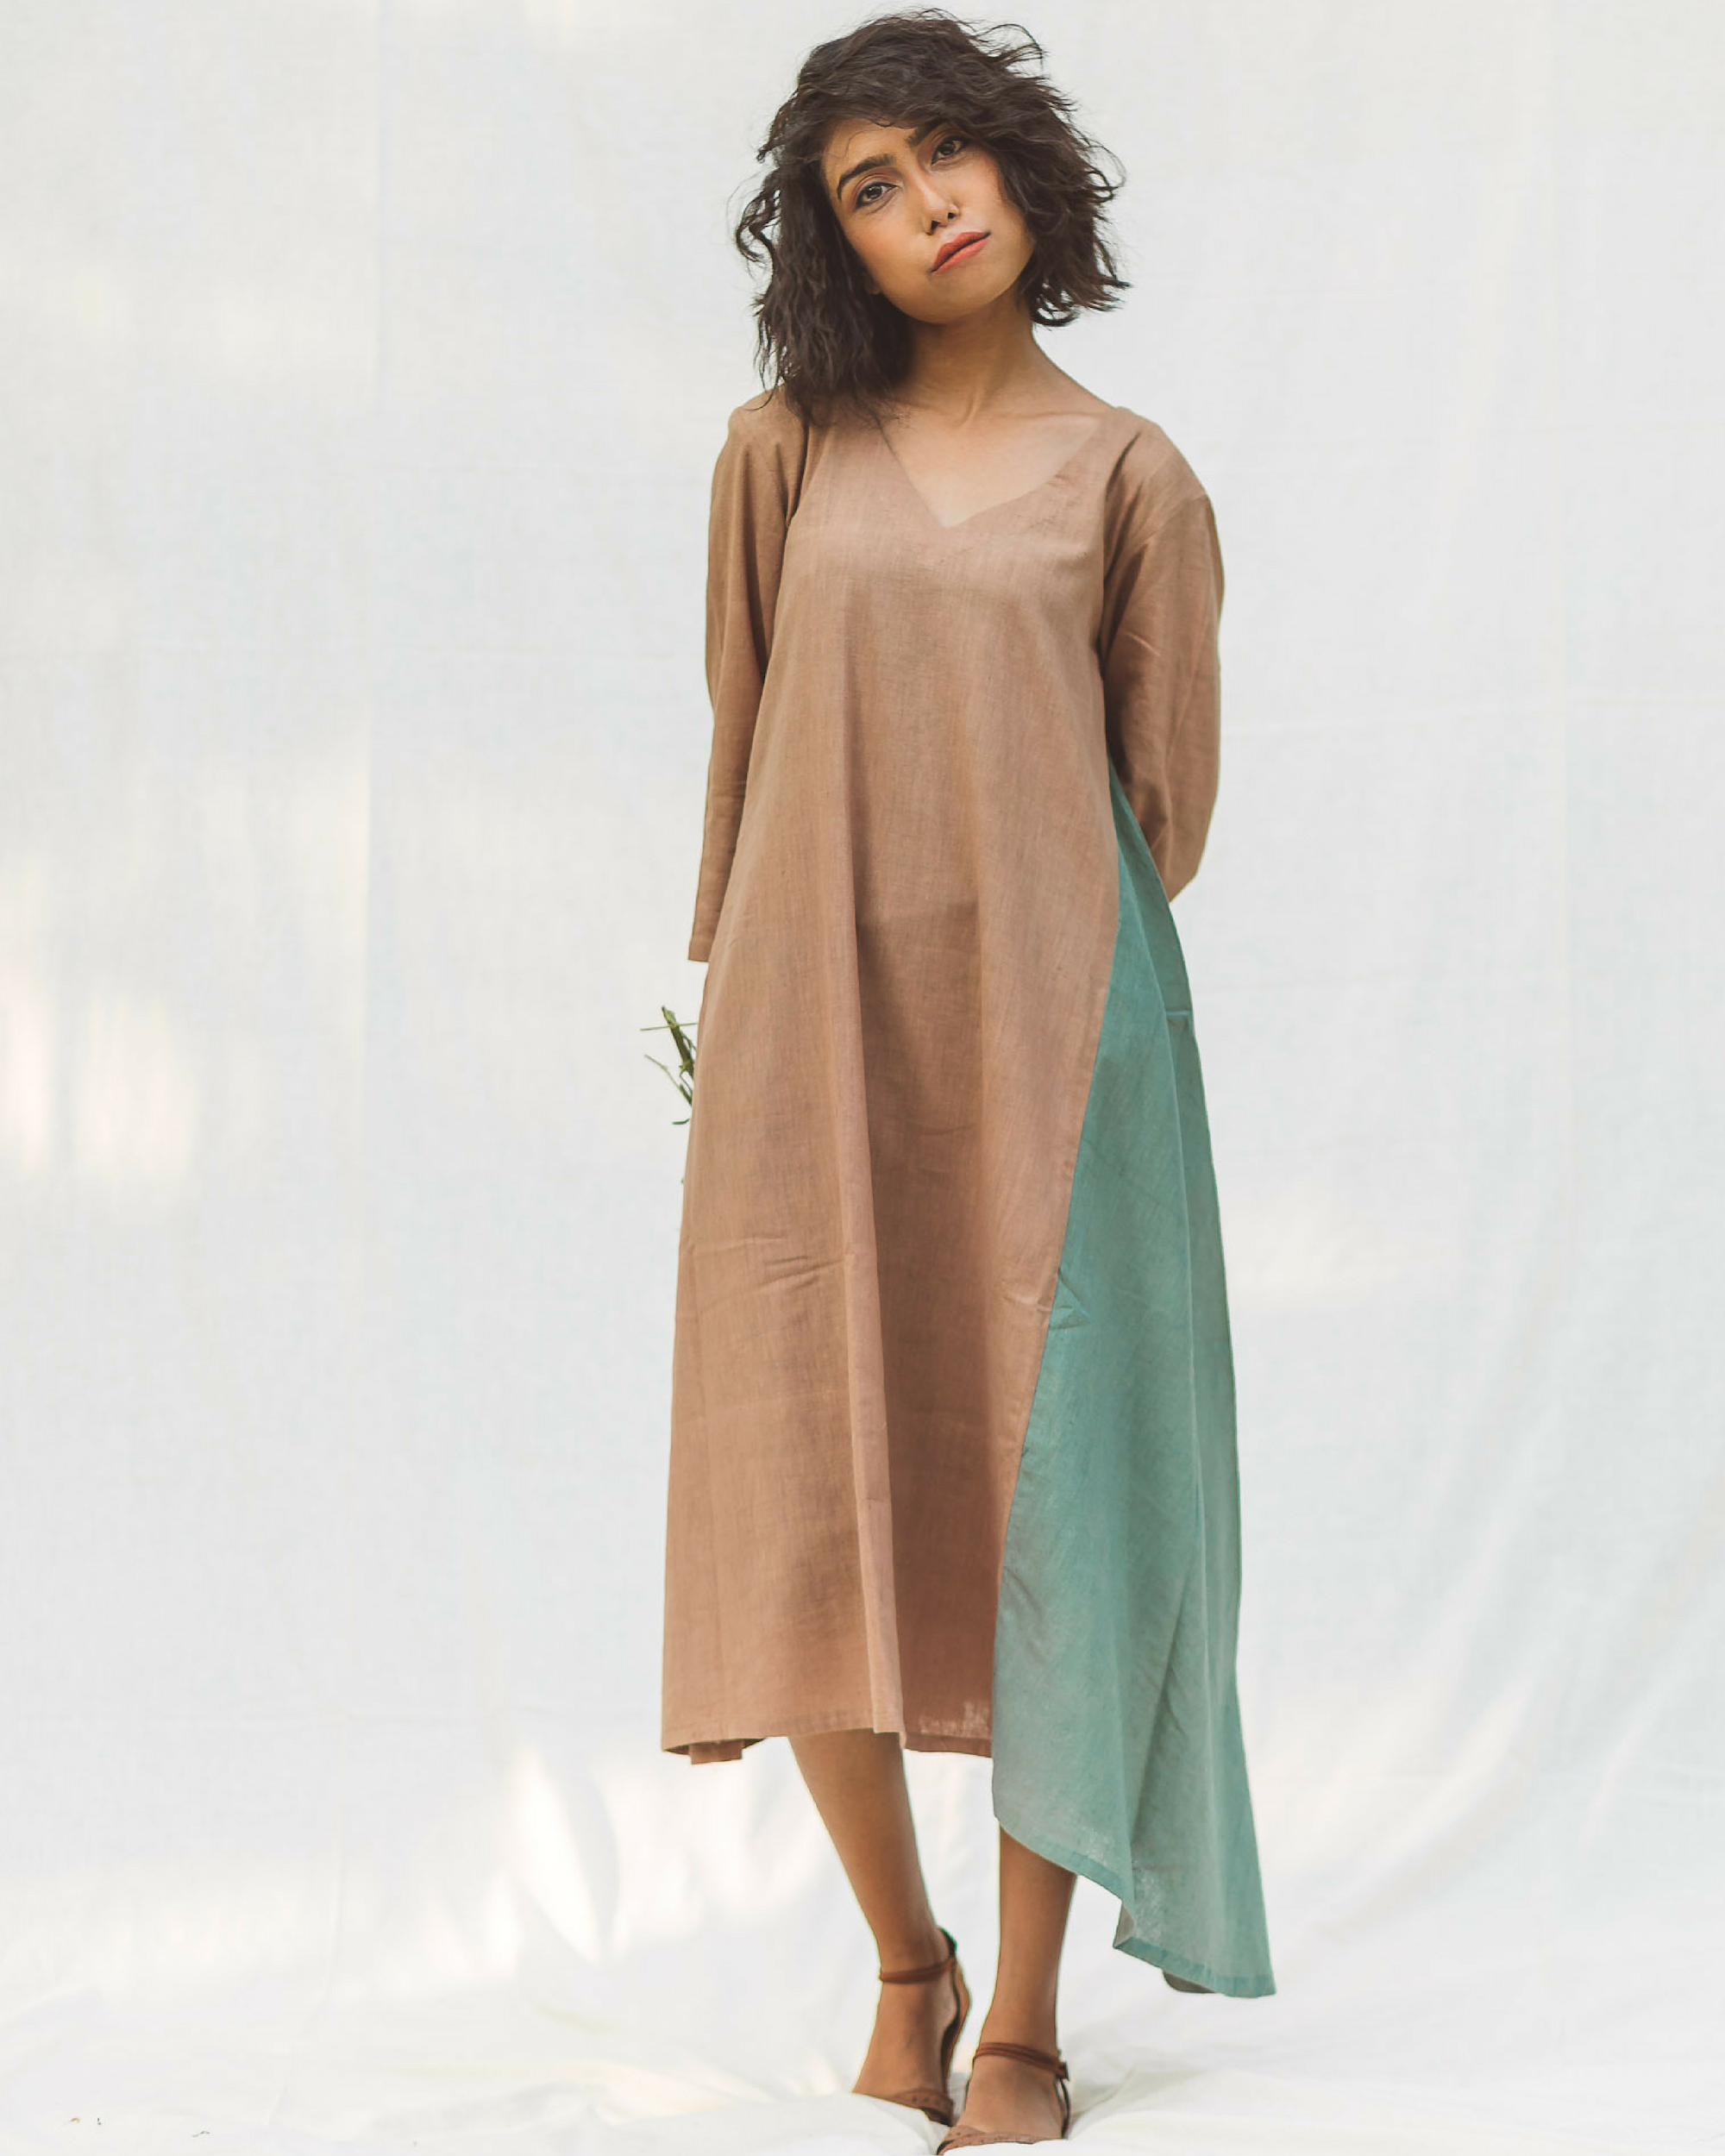 Brown and green dress by The Sweven Studio | The Secret Label